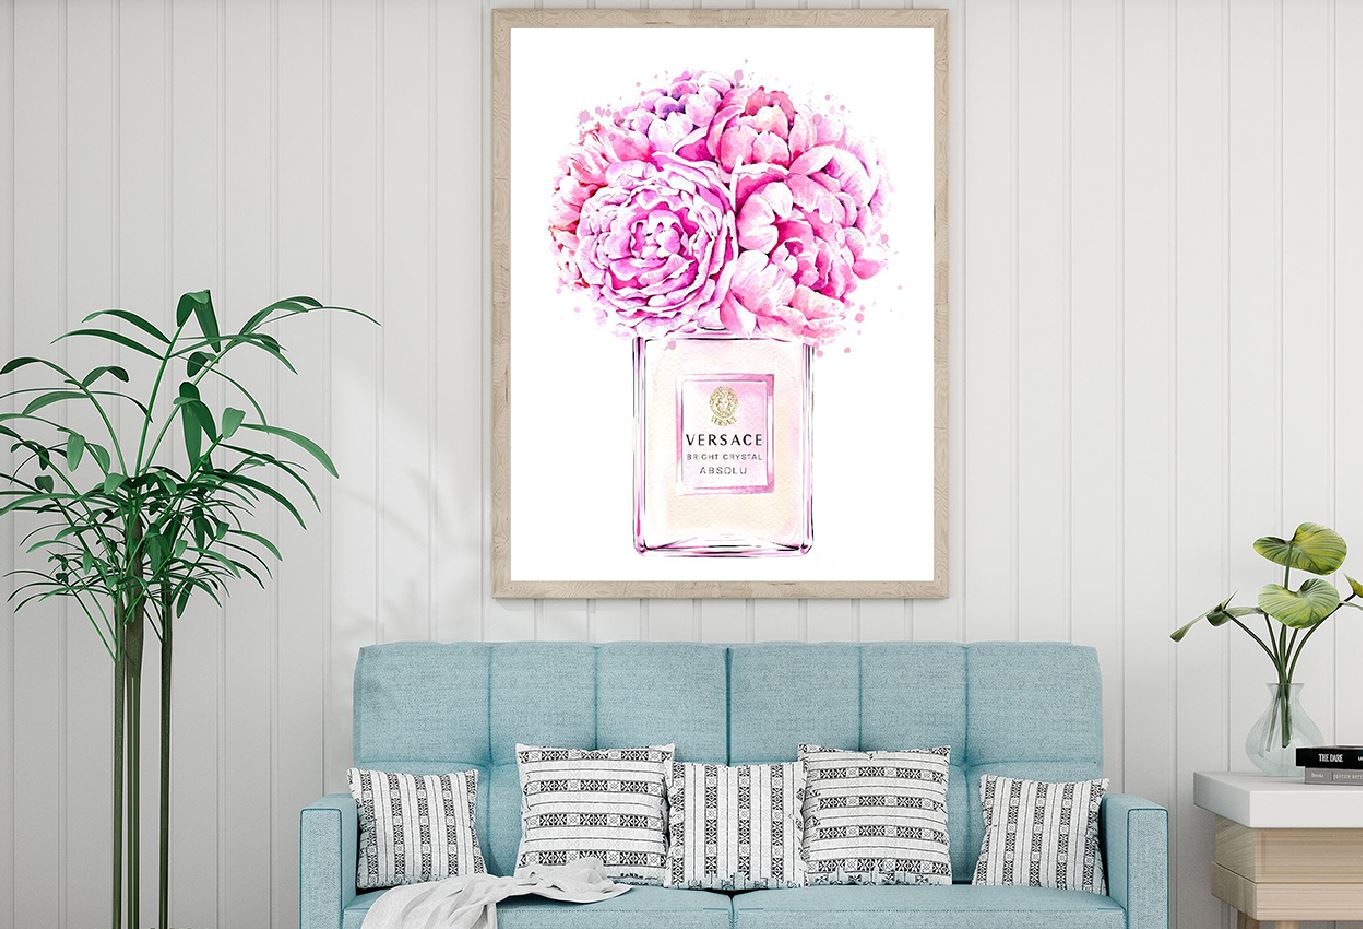 Versace Pink Perfume Bottle Watercolor Painting Home Decor Premium Quality Poster Print Choose Your Sizes